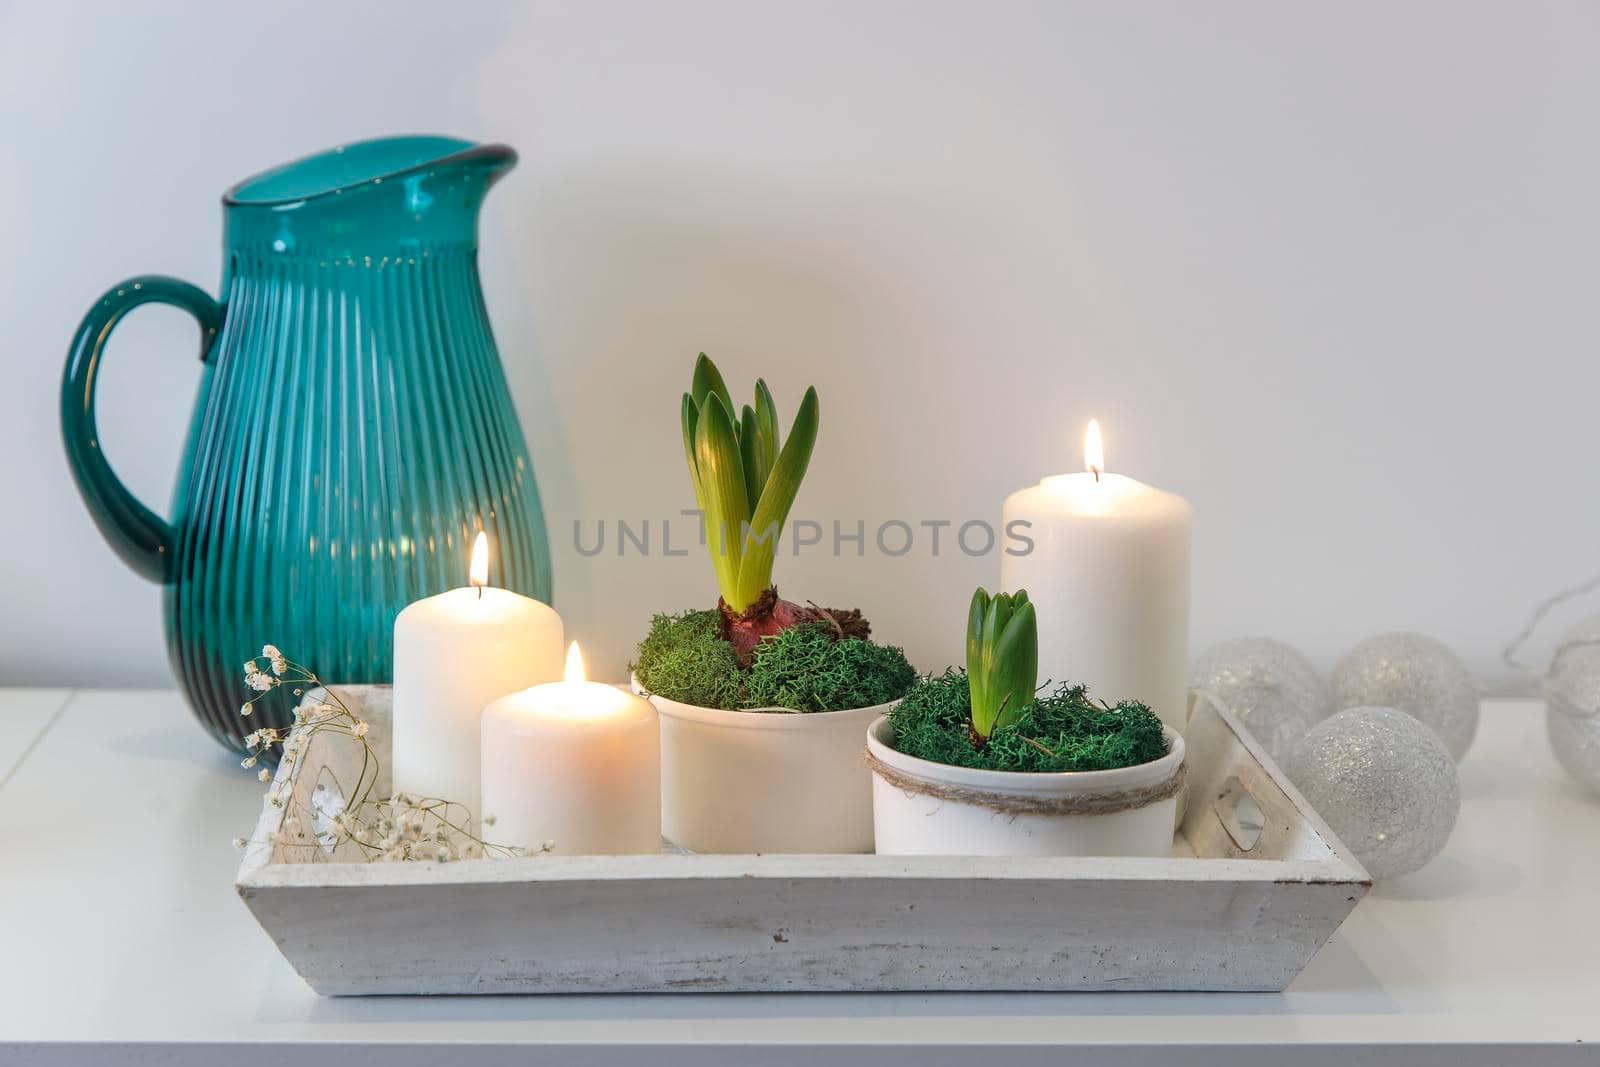 Unblown hyacinths with burning candles on a wooden vintage tray. Palm tree shadow on the wall. Home decoration for spring by elenarostunova